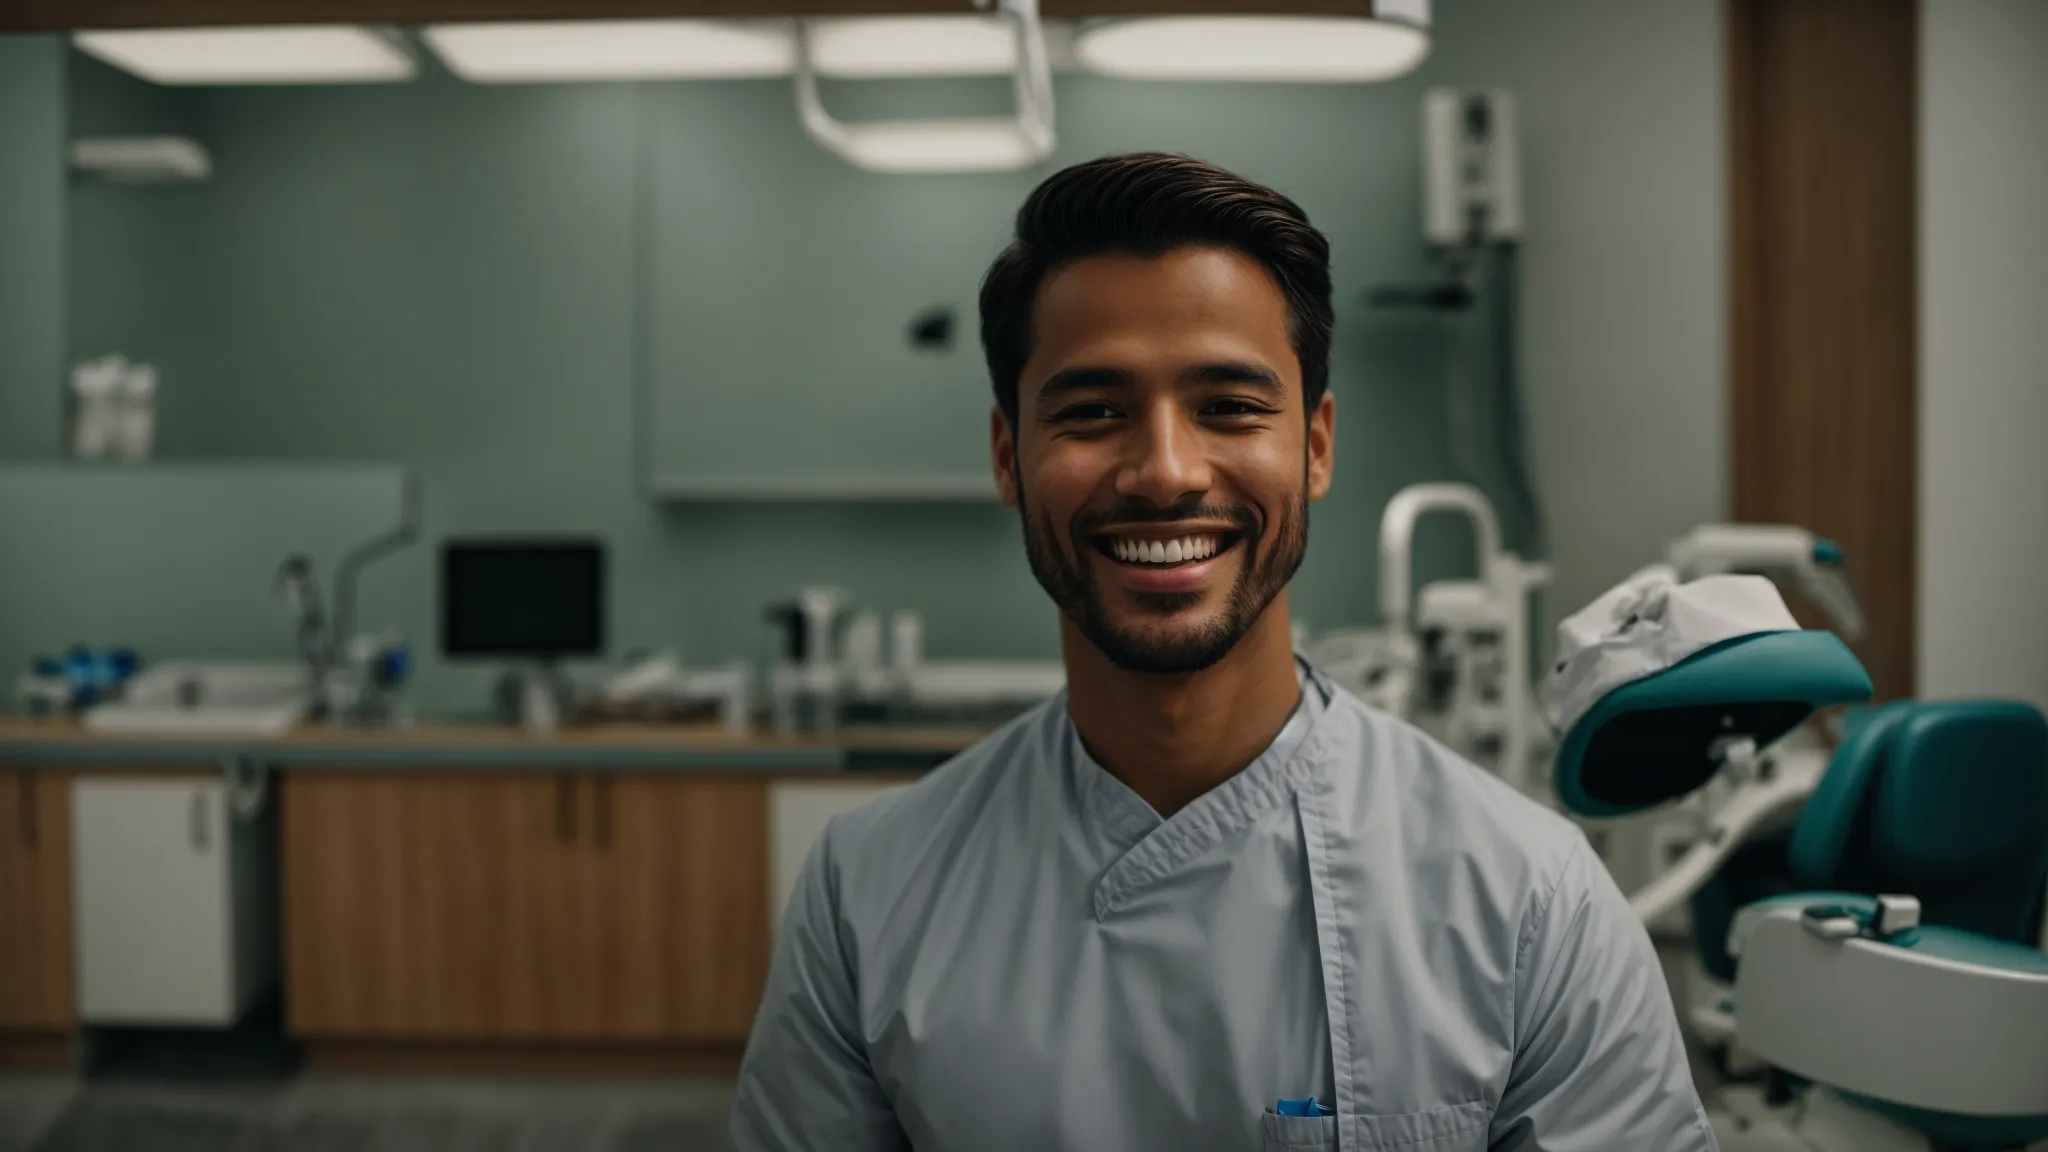 a person smiling confidently in a dentist's clinic with modern equipment visible in the background.